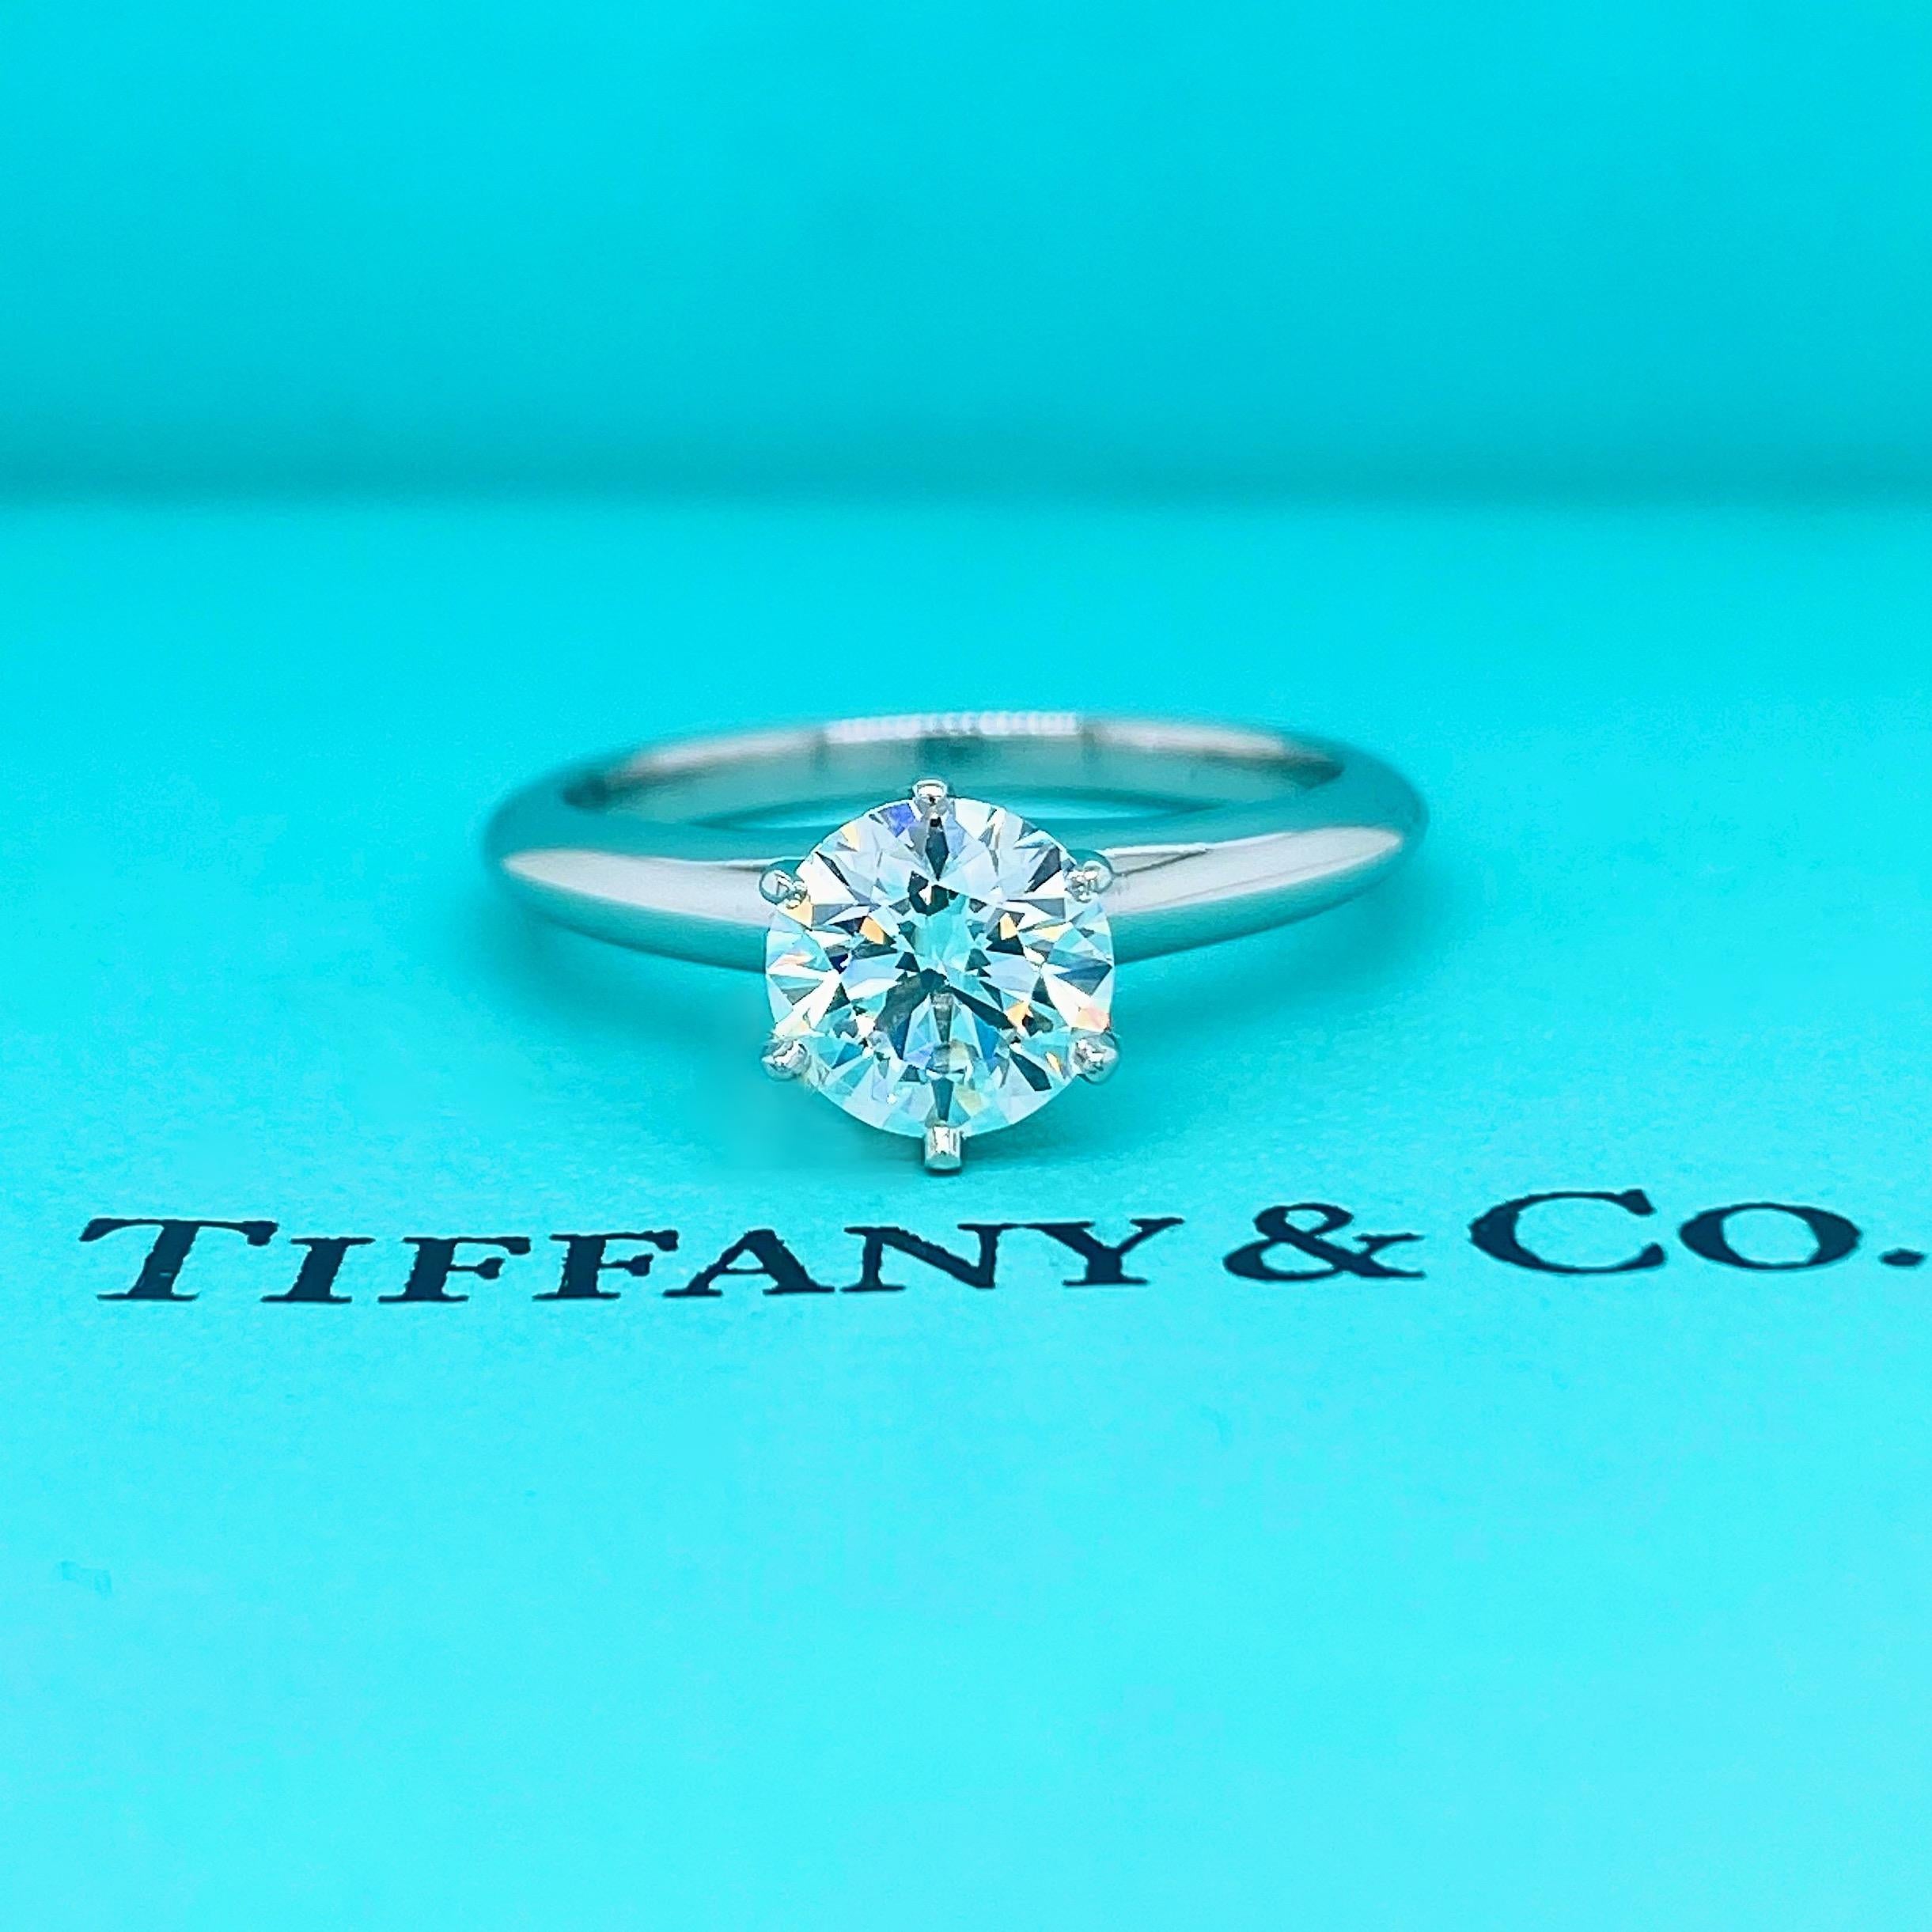 Tiffany & Co. Round Diamond 1.03 Carat G VS1 Solitaire Ring in Platinum In Excellent Condition For Sale In San Diego, CA